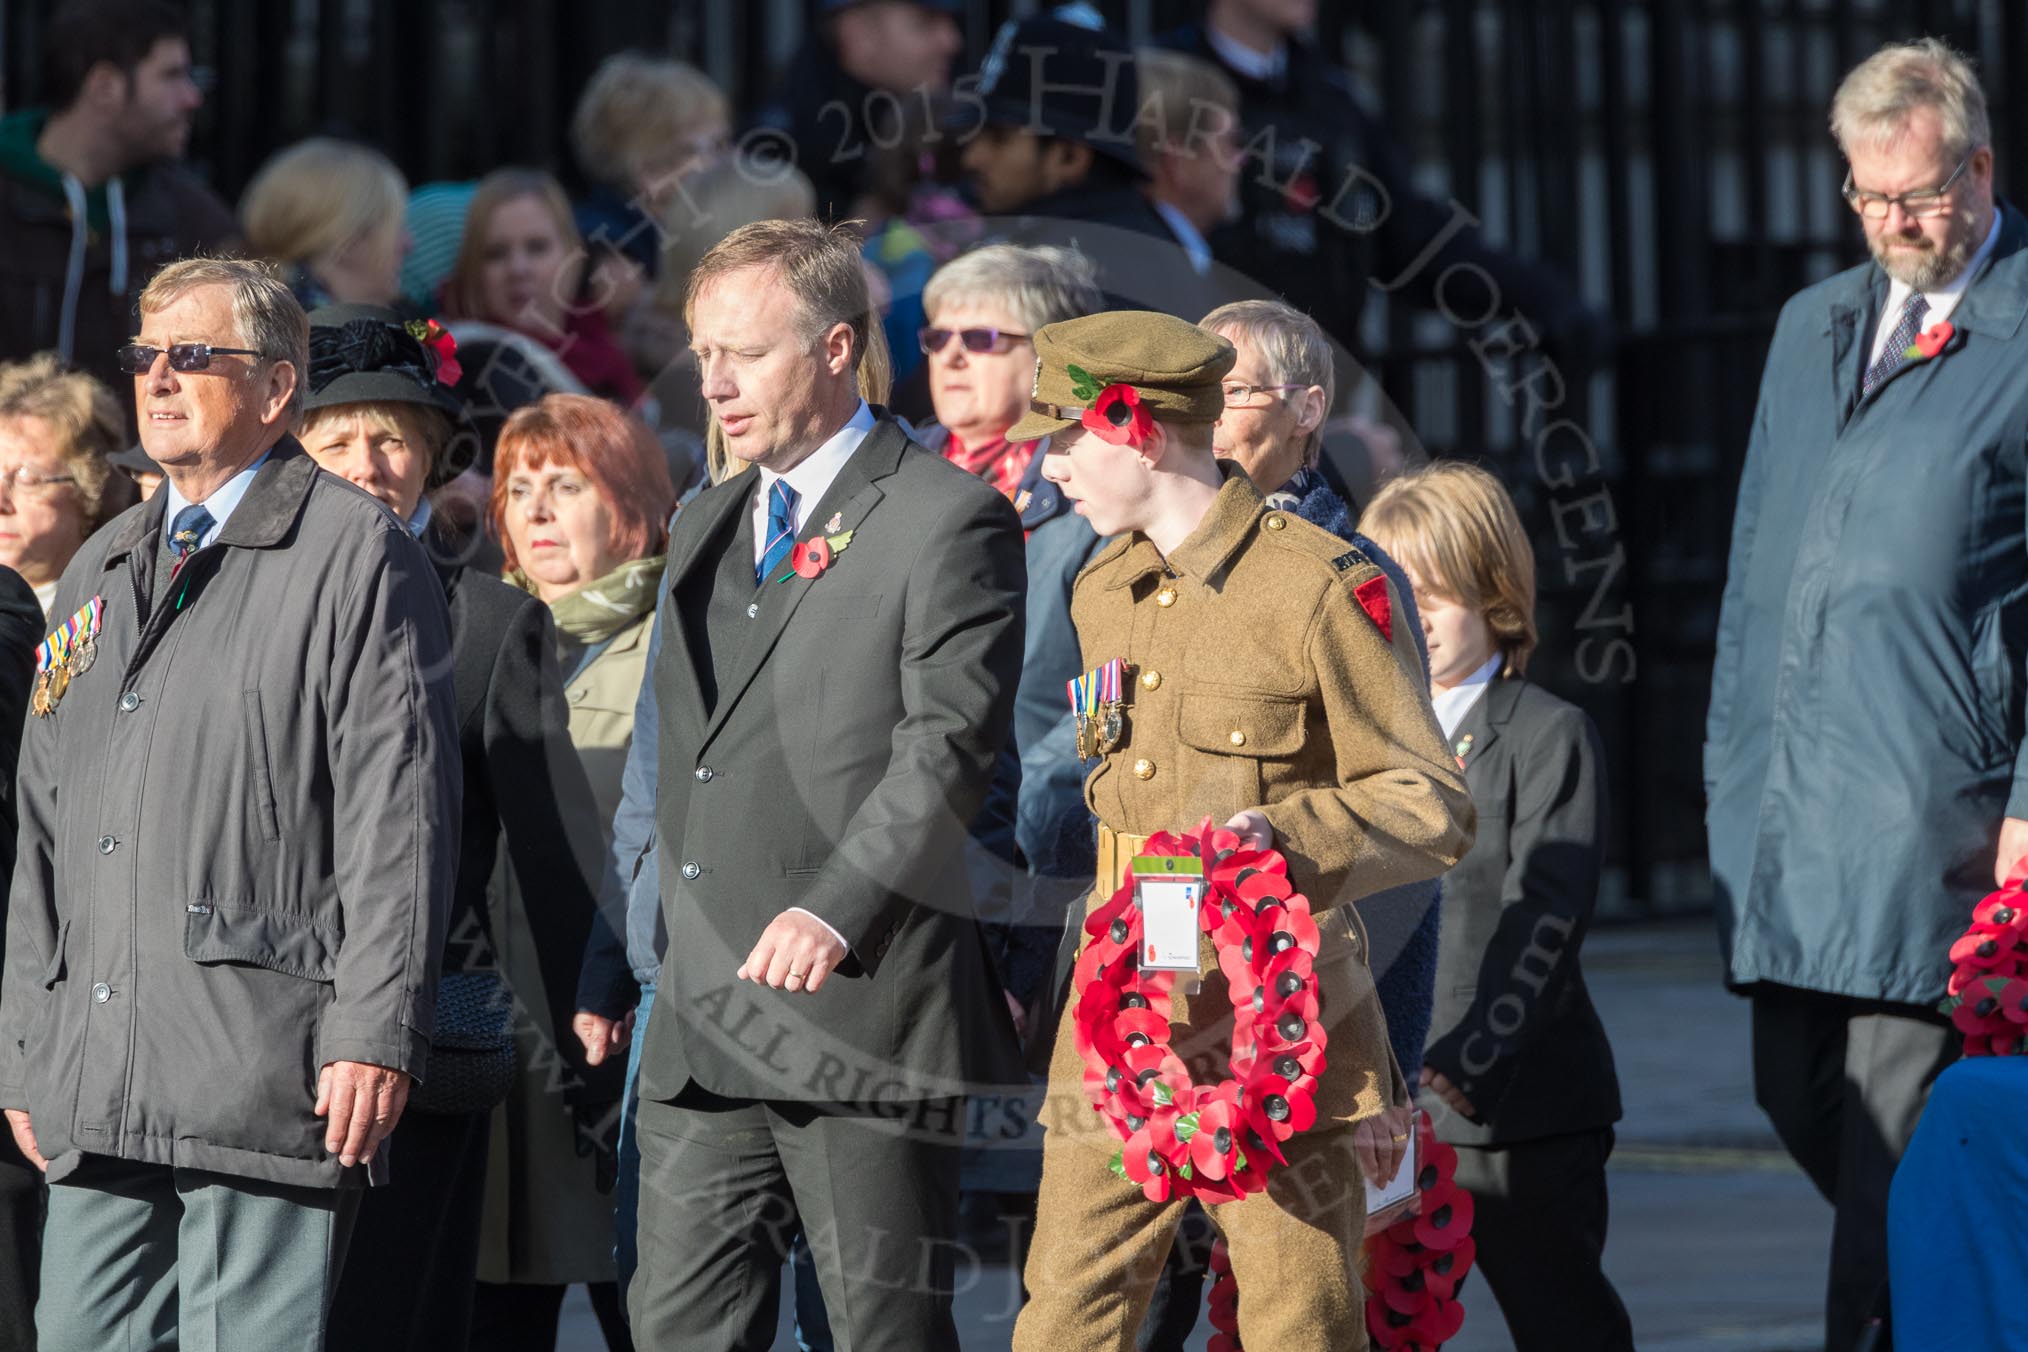 March Past, Remembrance Sunday at the Cenotaph 2016: M22 The Royal British Legion - Civilians.
Cenotaph, Whitehall, London SW1,
London,
Greater London,
United Kingdom,
on 13 November 2016 at 13:16, image #2669